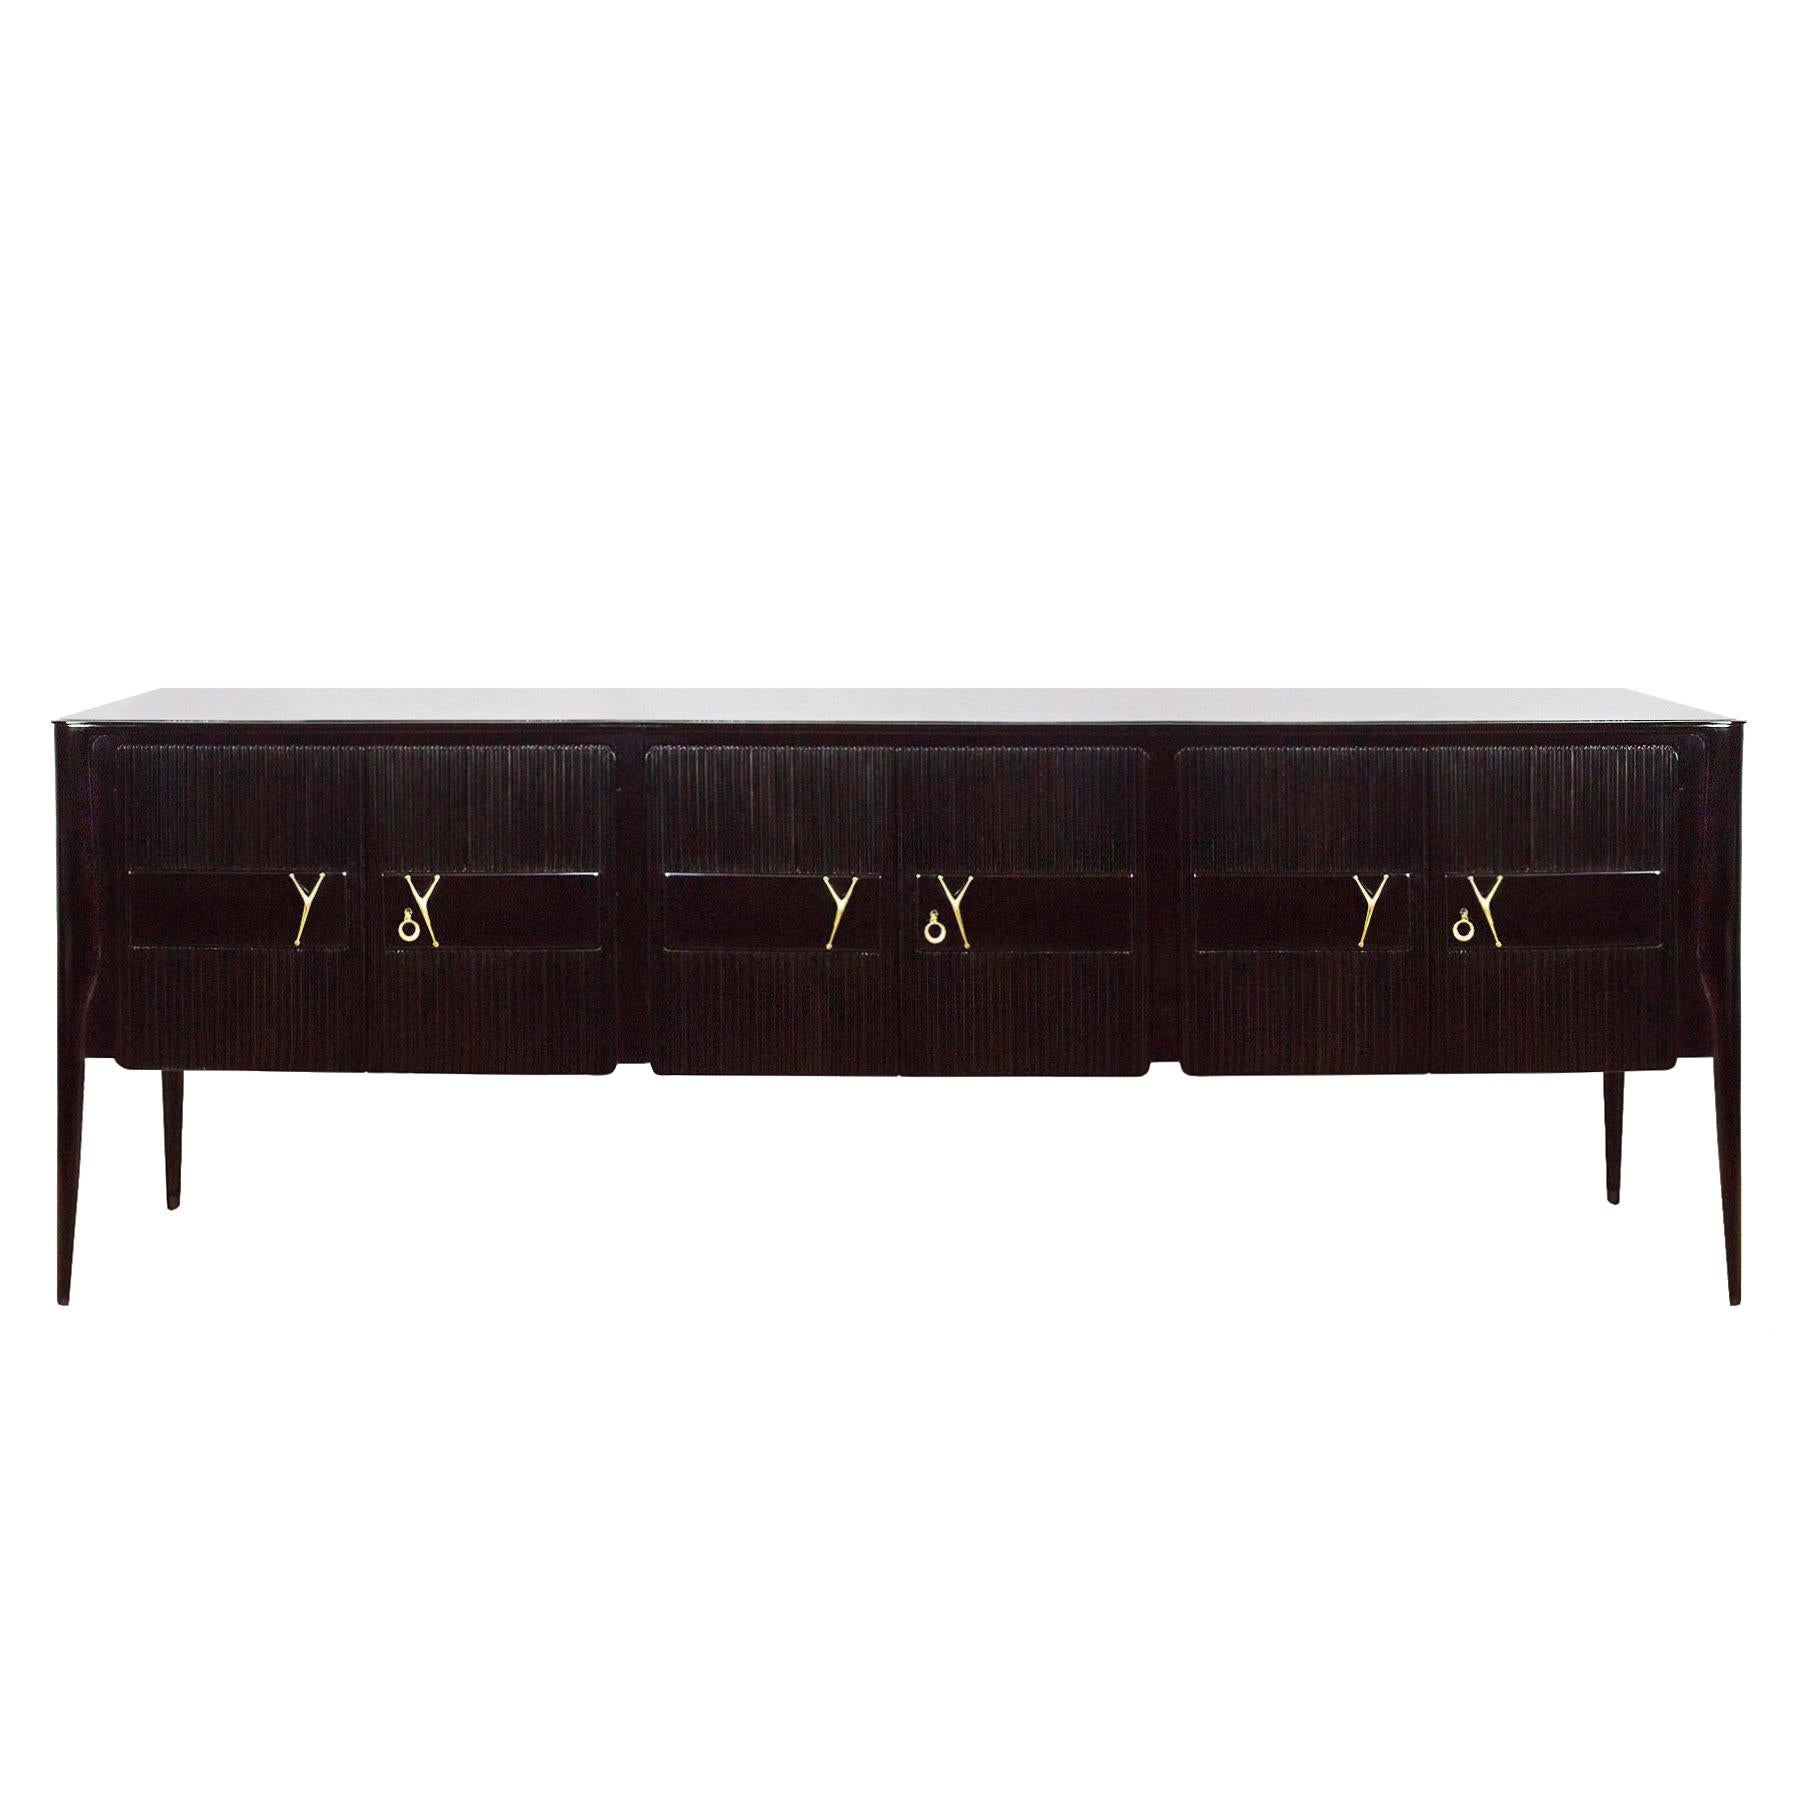 1945-1950 Sideboard in the Style of Ico Parisi, Mahogany, Bronze, Brass, Italy